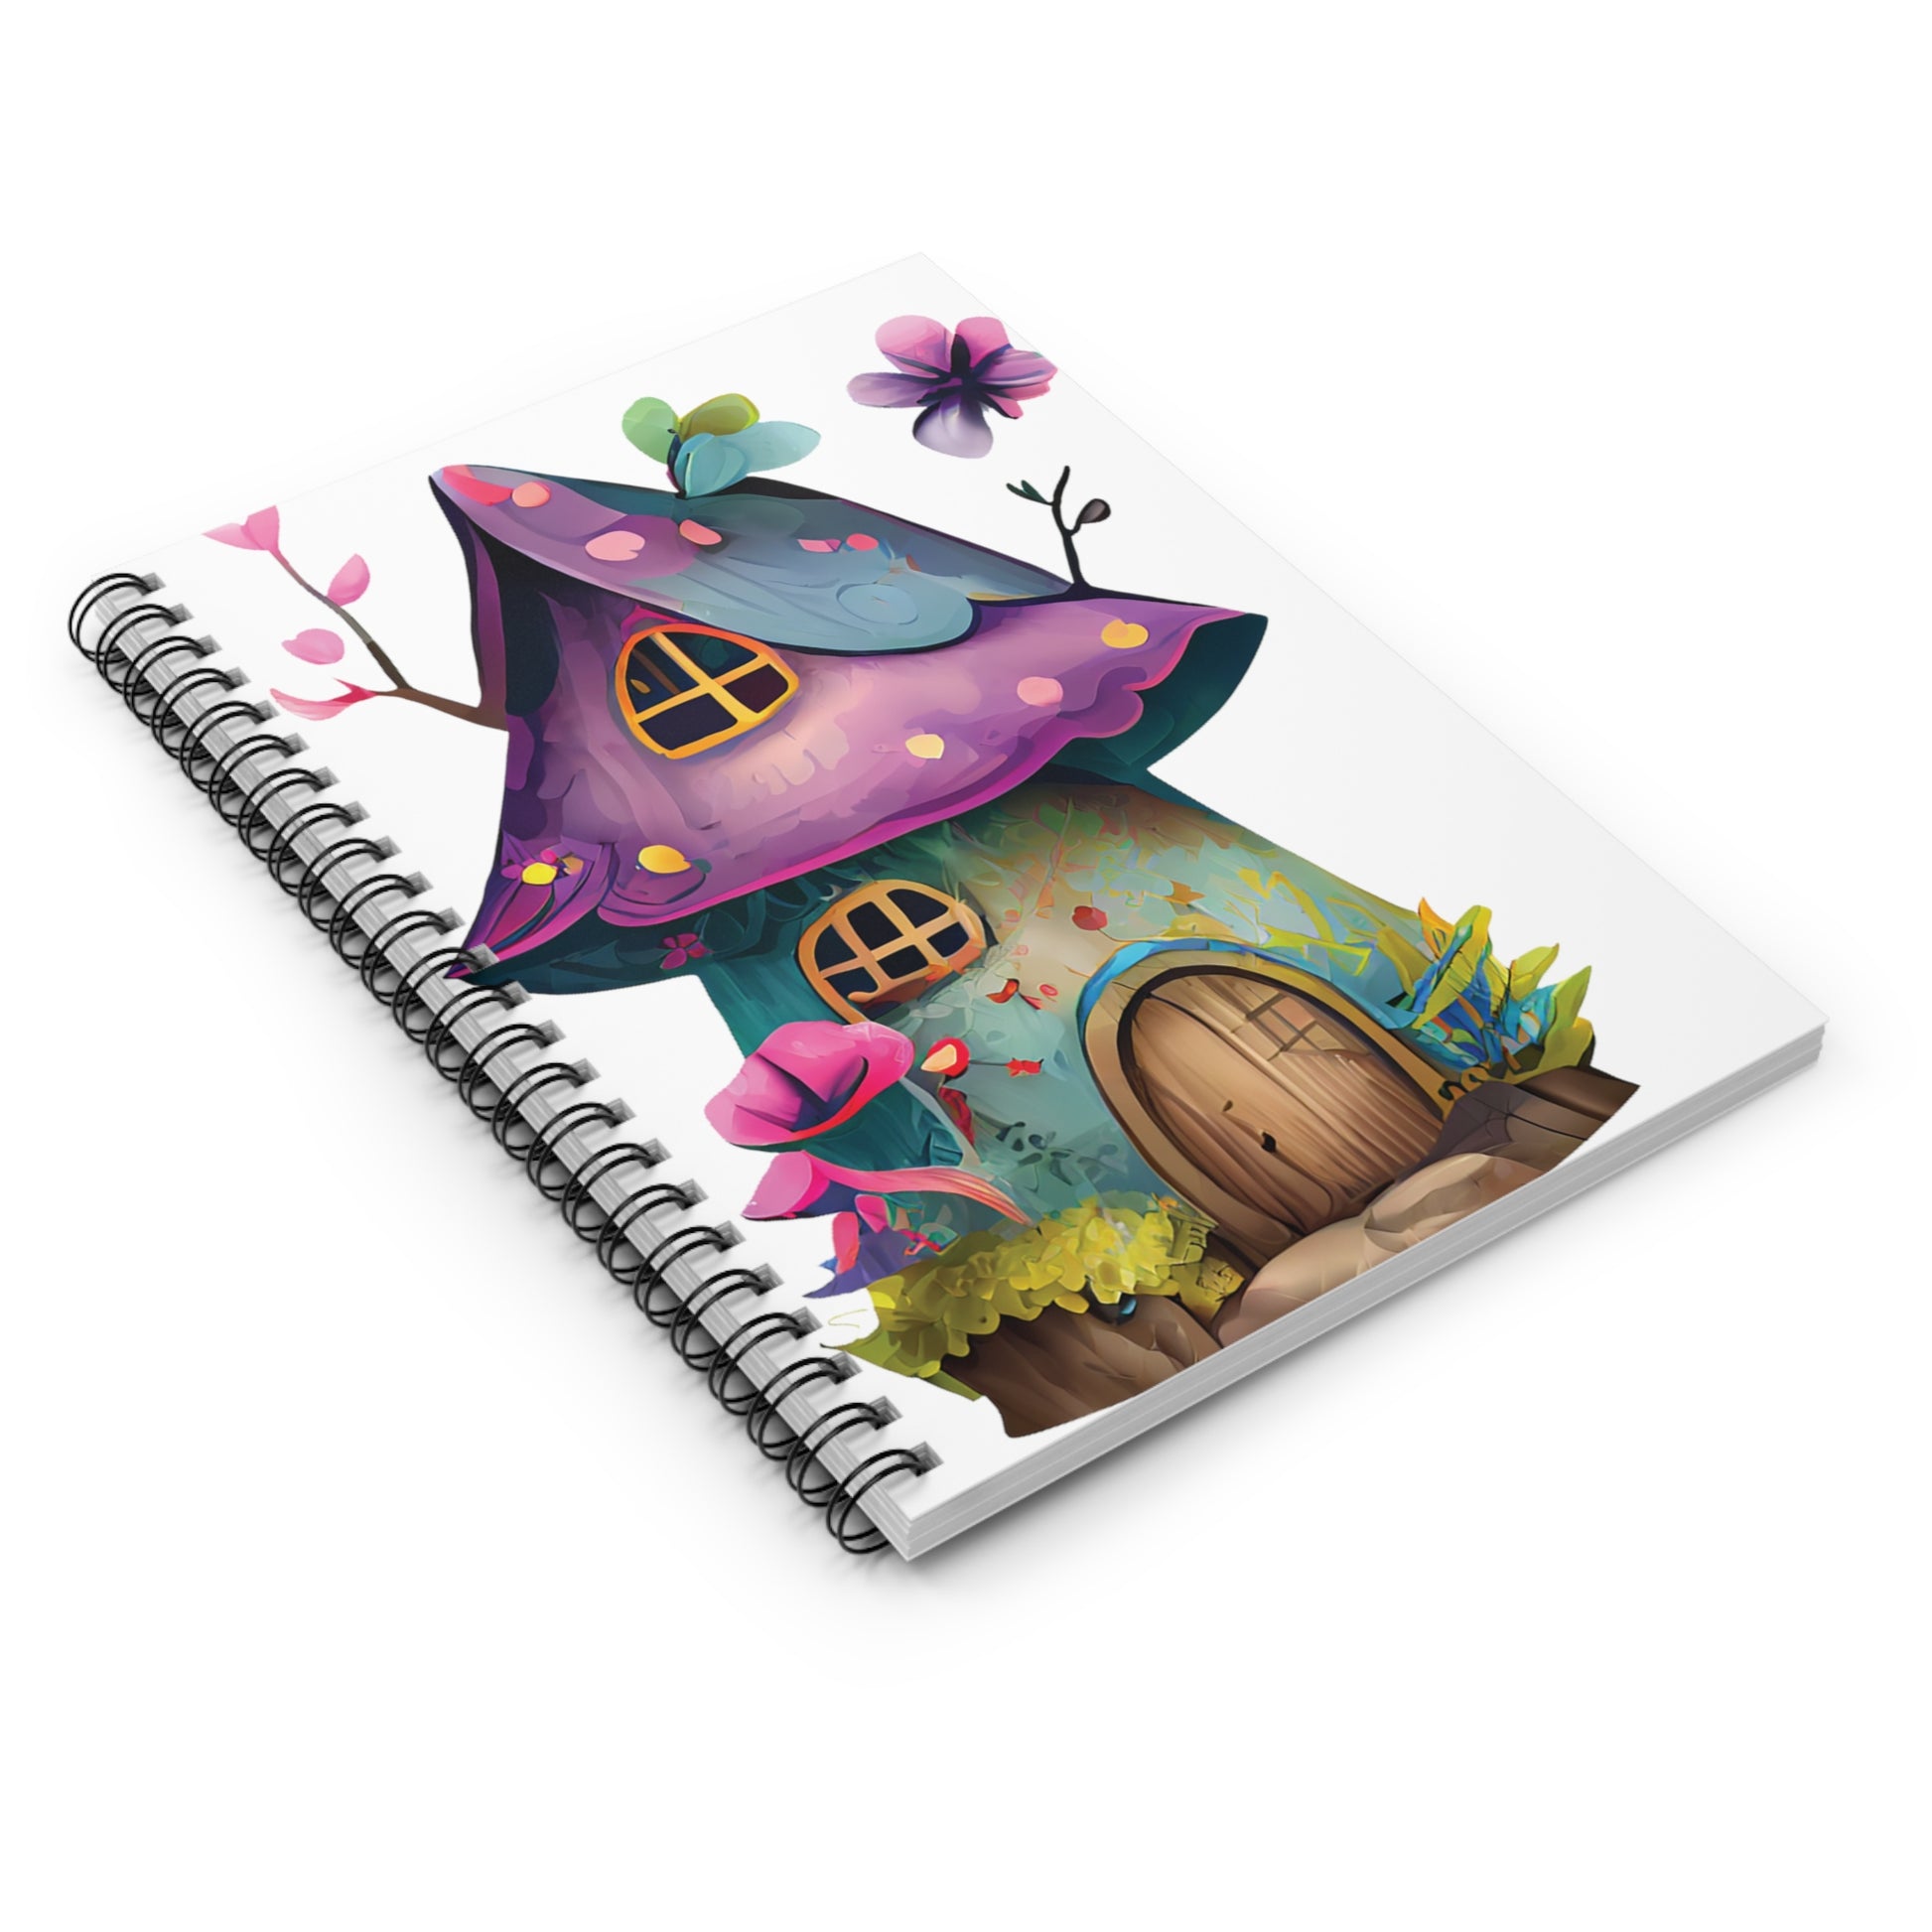 Fairy House: Spiral Notebook - Log Books - Journals - Diaries - and More Custom Printed by TheGlassyLass